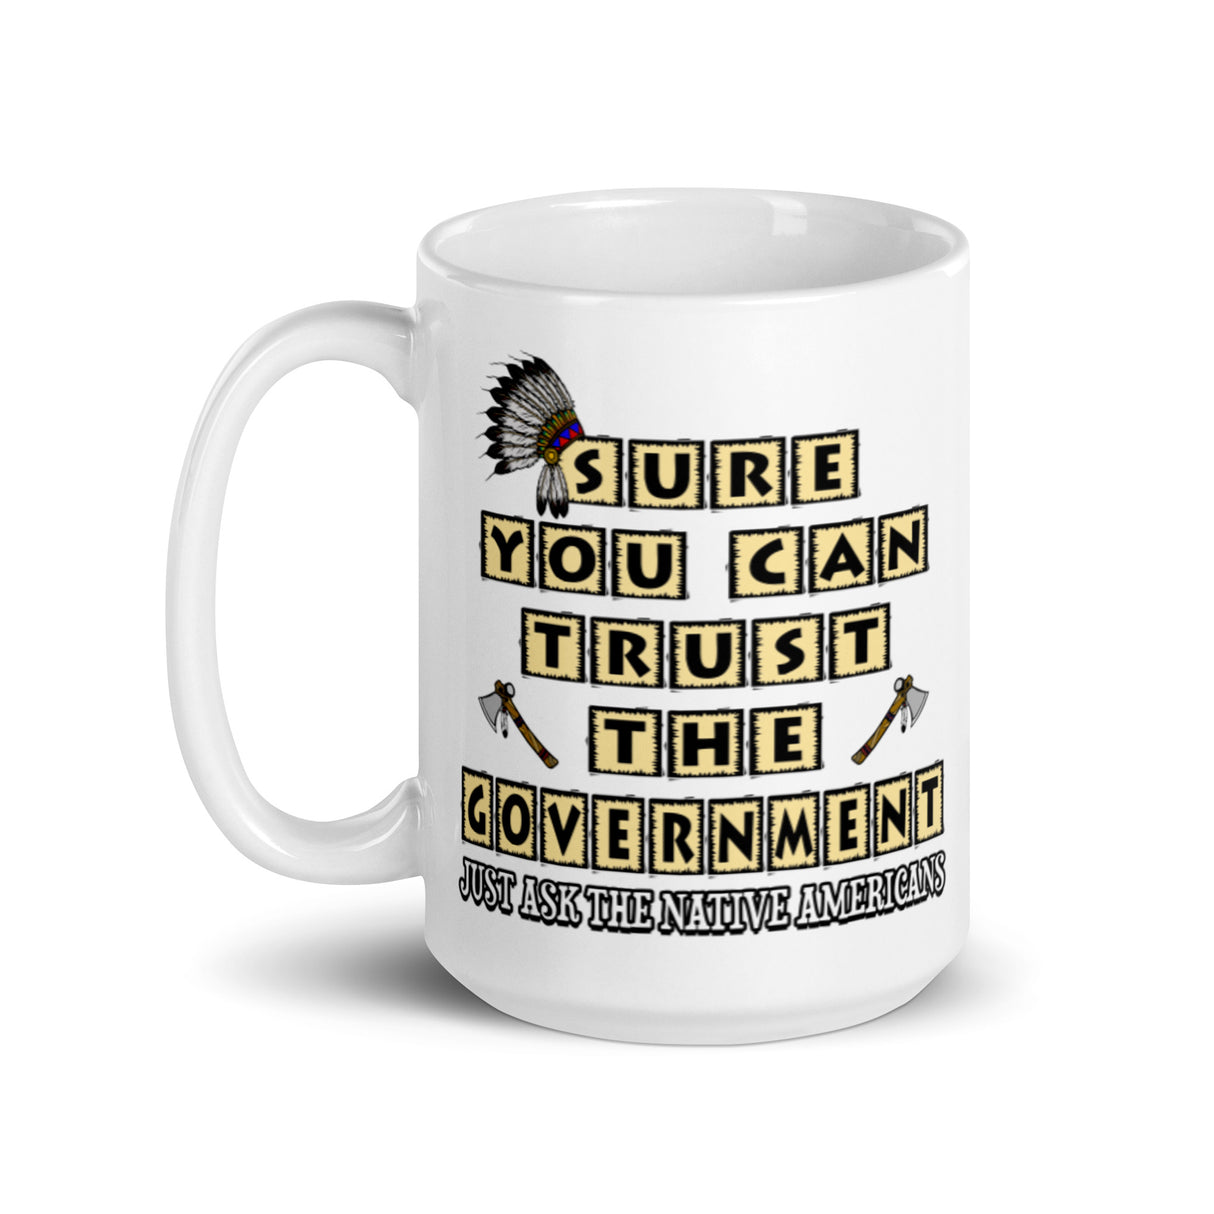 Sure You Can Trust The Government Coffee Mug - Libertarian Country